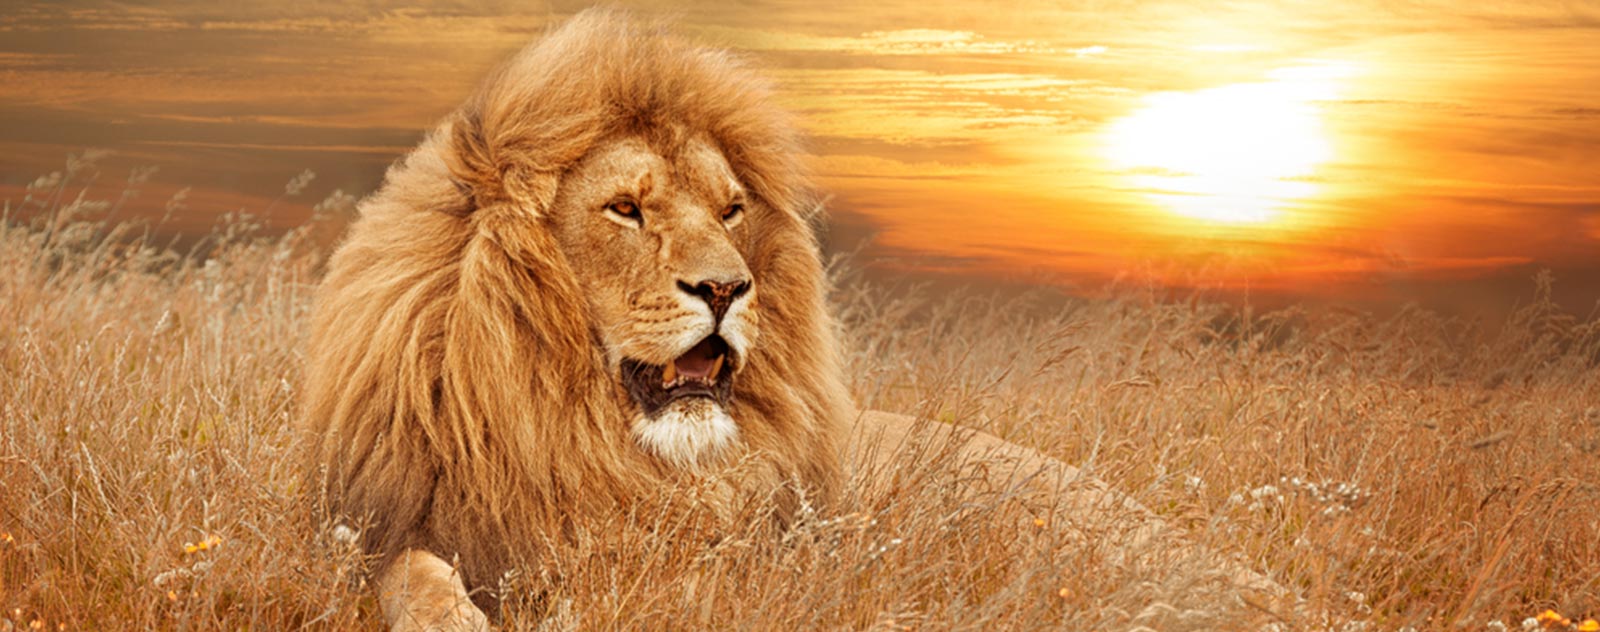 lion-in-the-savanna-with-setting-sun